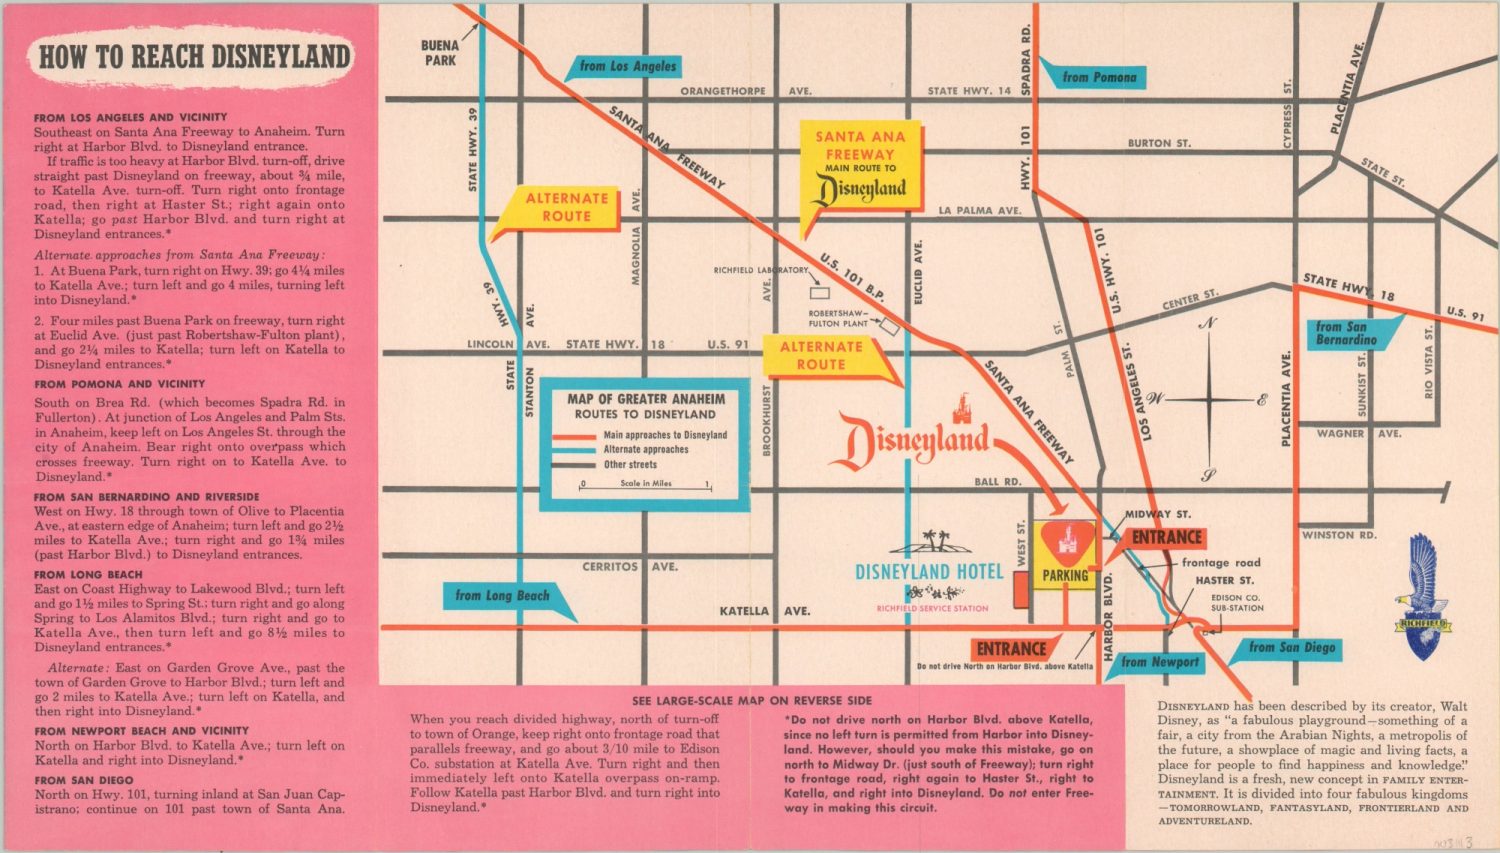 OFFICIAL ROAD MAP TO DISNEYLAND